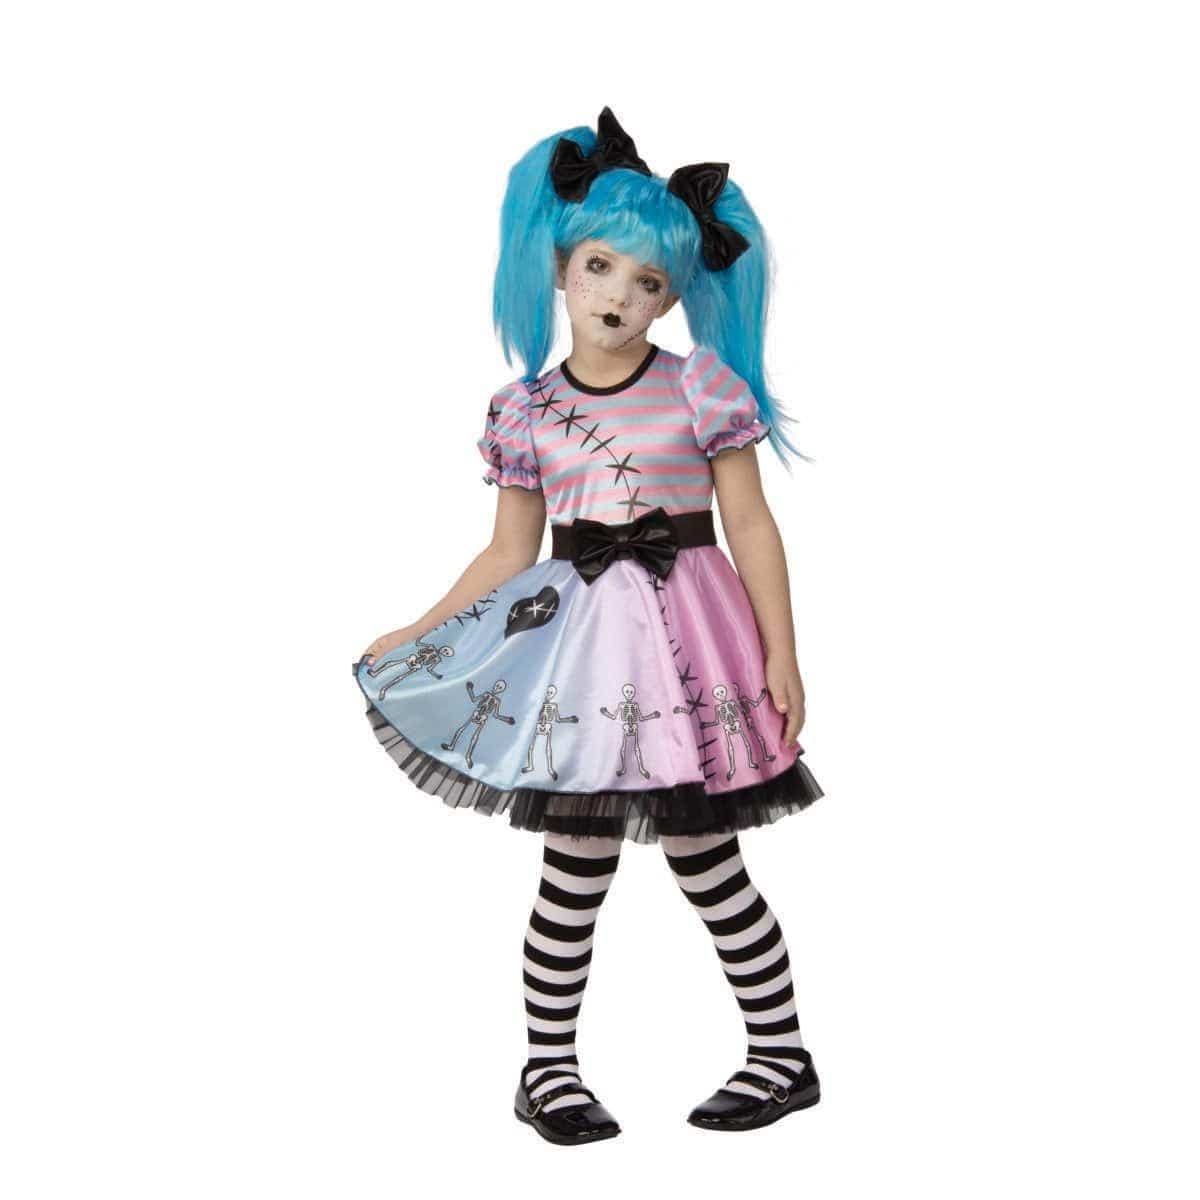 Buy Costumes Little Blue Skelly Costume for Kids sold at Party Expert